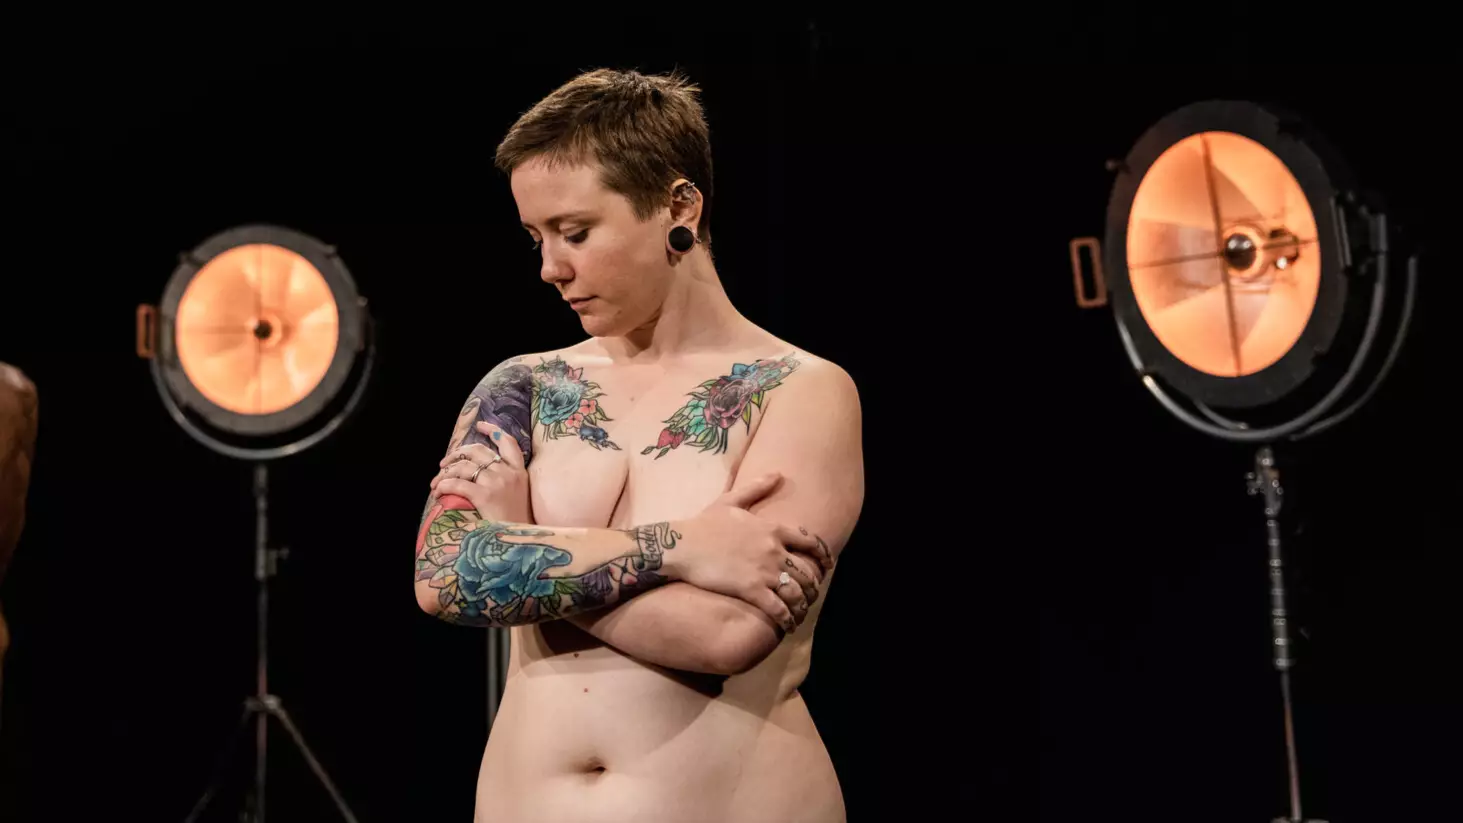 People Divided Over Children's TV Show Where Adults Are Naked To 'Promote Body Positivity'